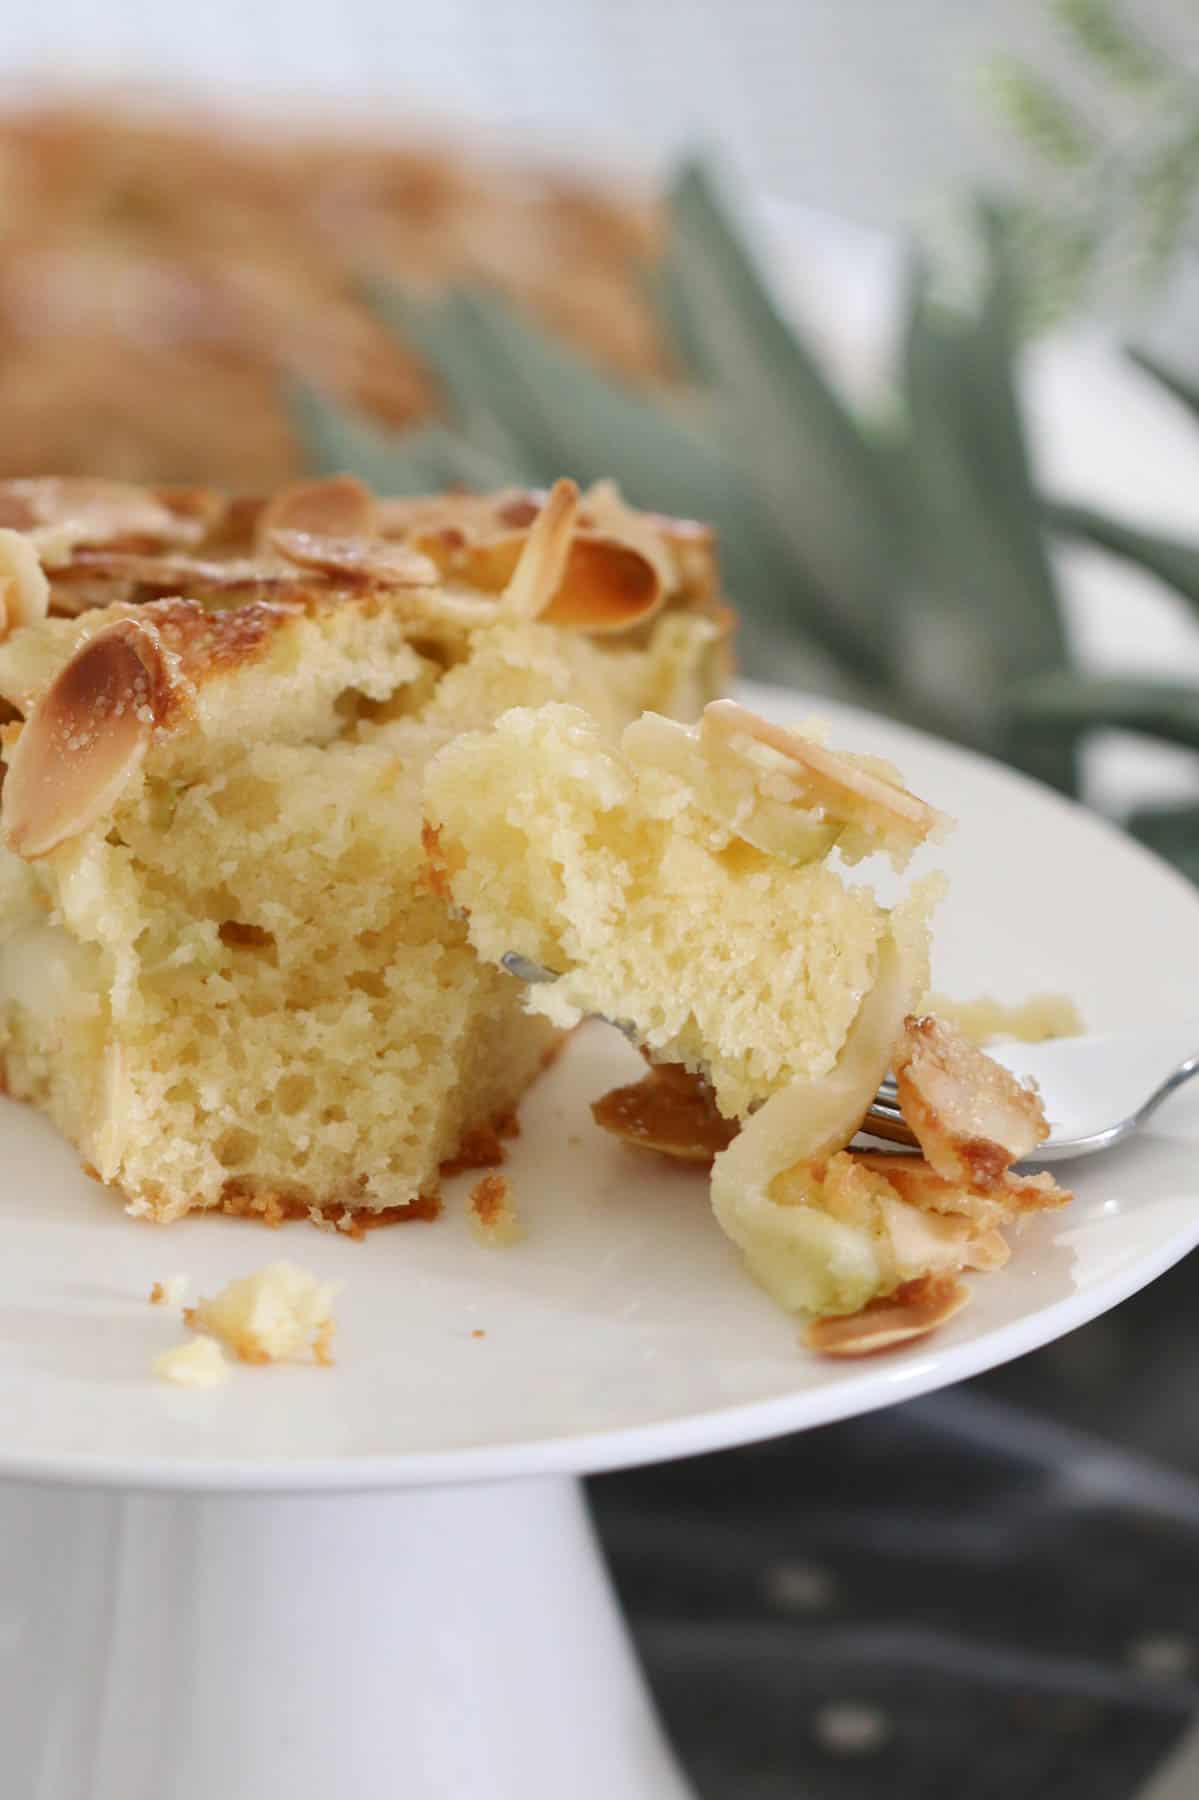 A forkful of soft butter cake with apples and almonds.